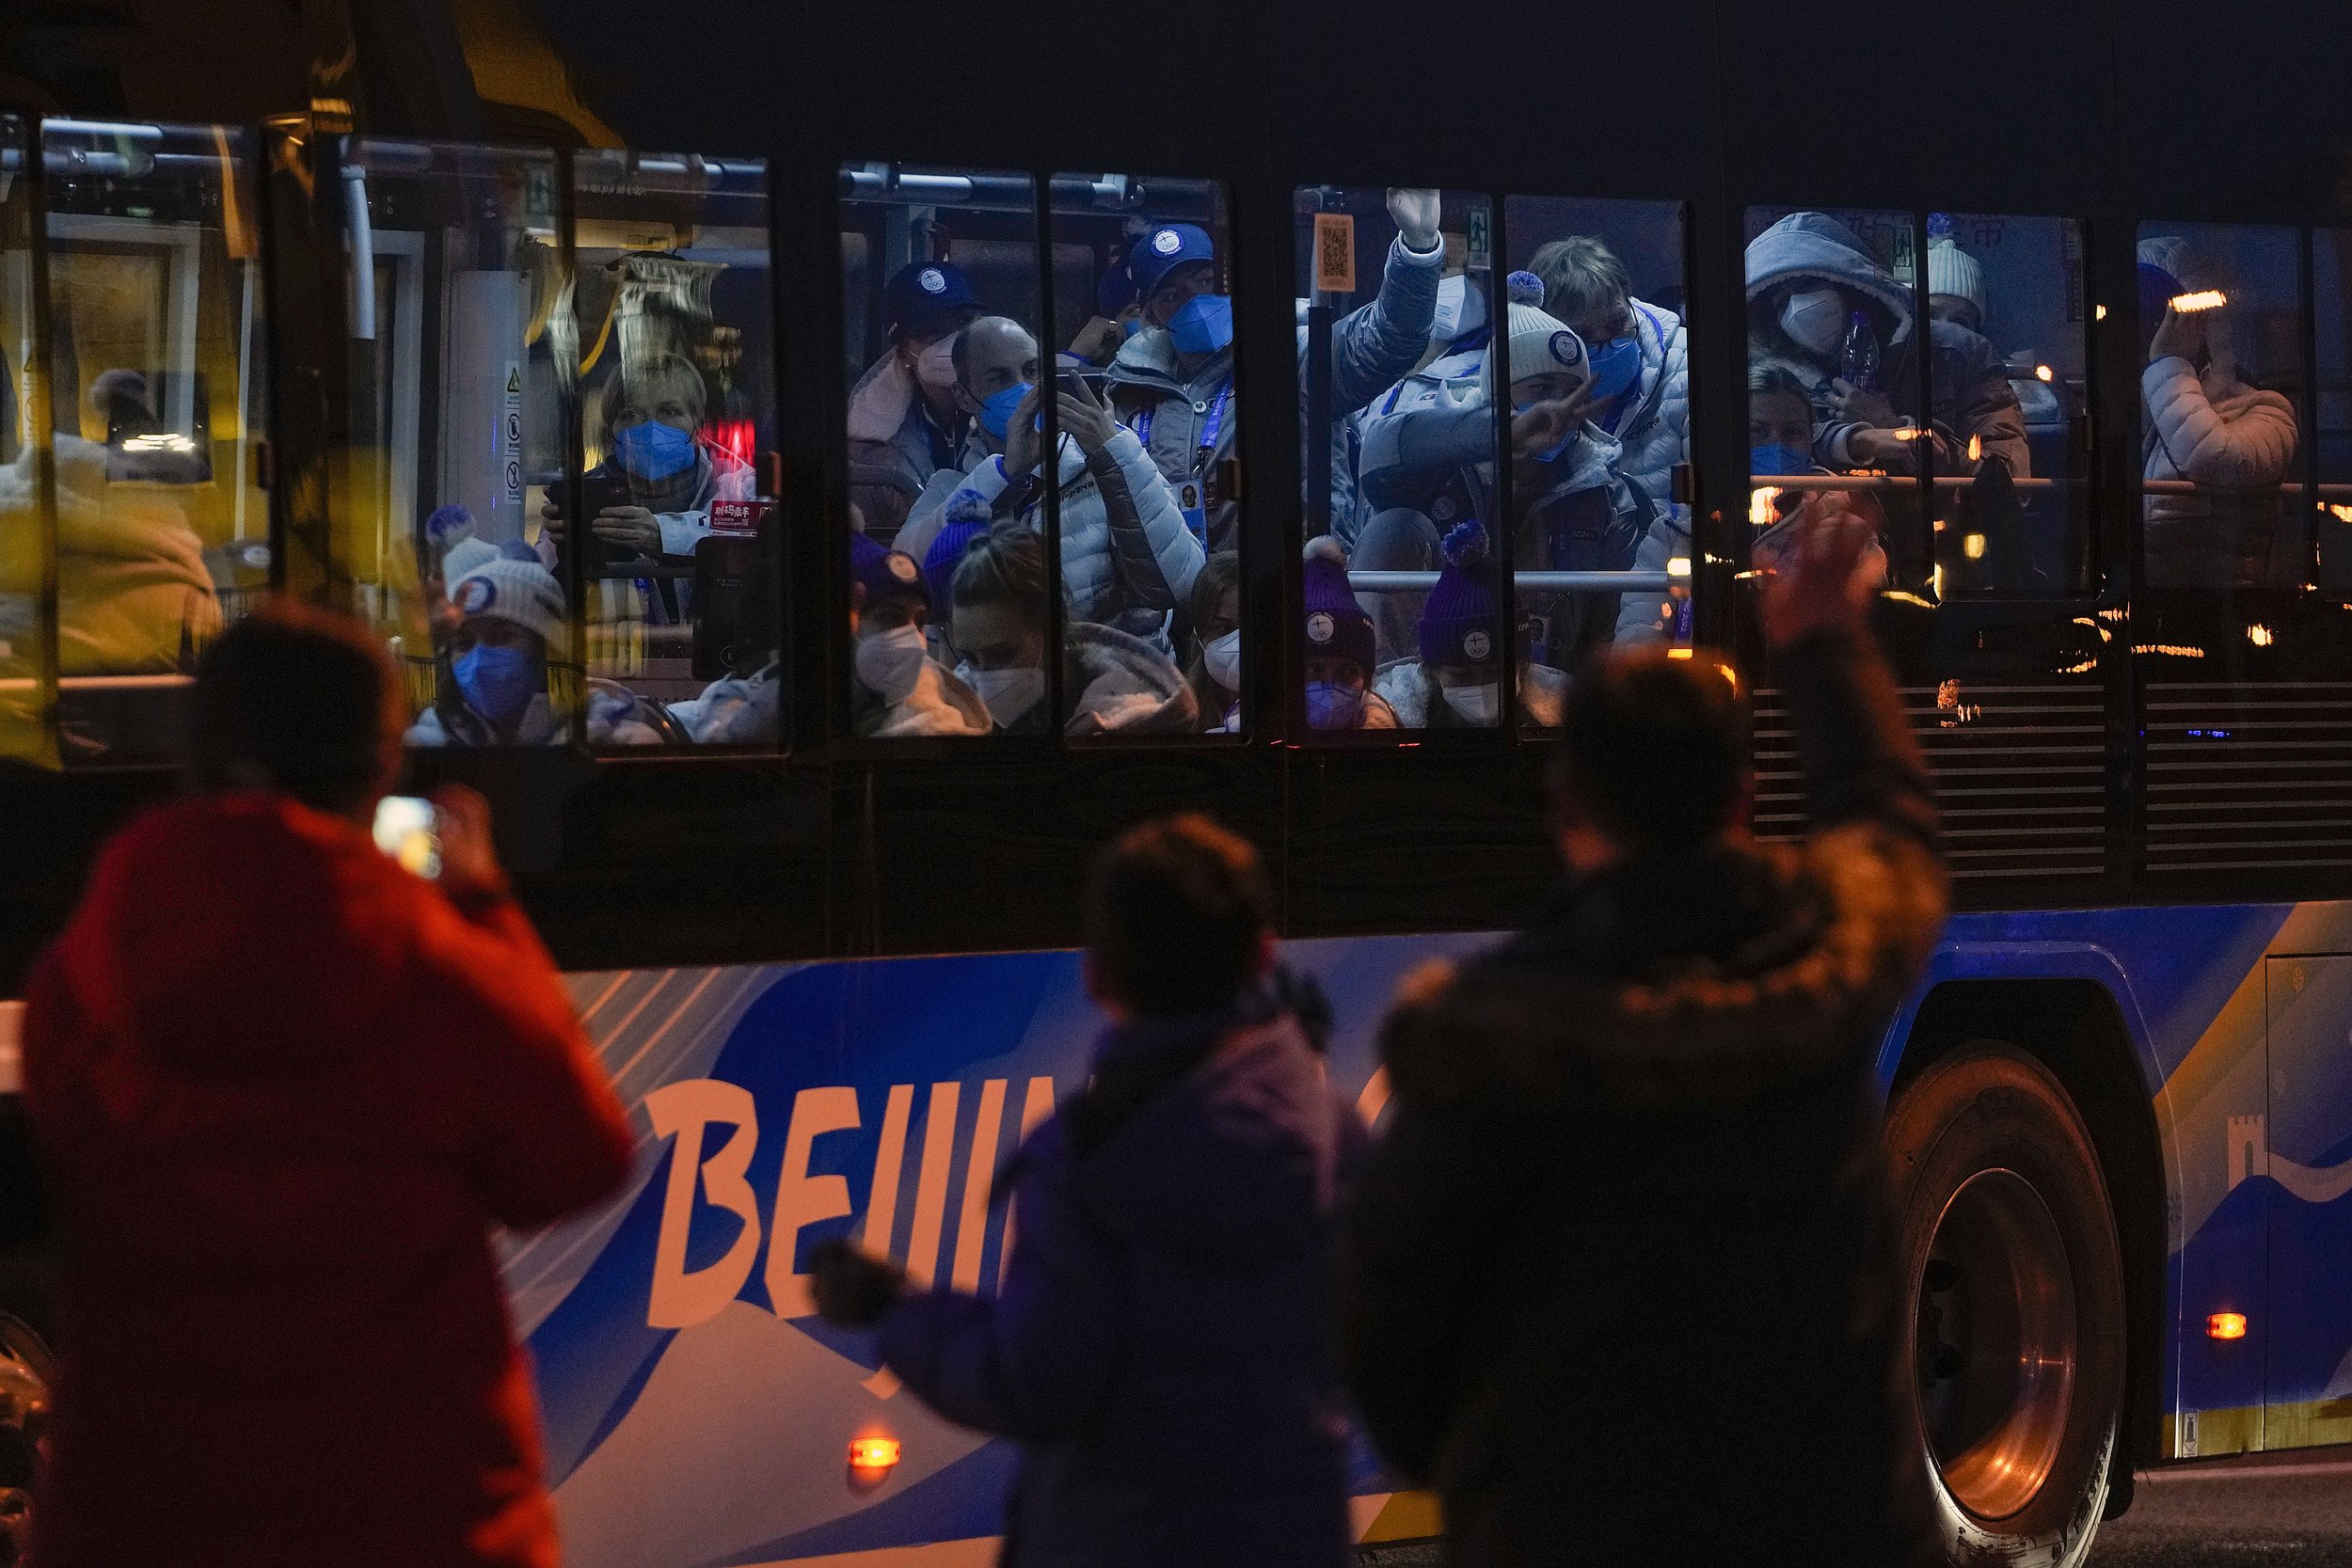  Foreign athletes inside a bus respond to residents on a street as they were heading to the National Stadium ahead of the opening ceremony of the 2022 Winter Olympics, in Beijing, Feb. 4, 2022. (AP Photo/Andy Wong) 